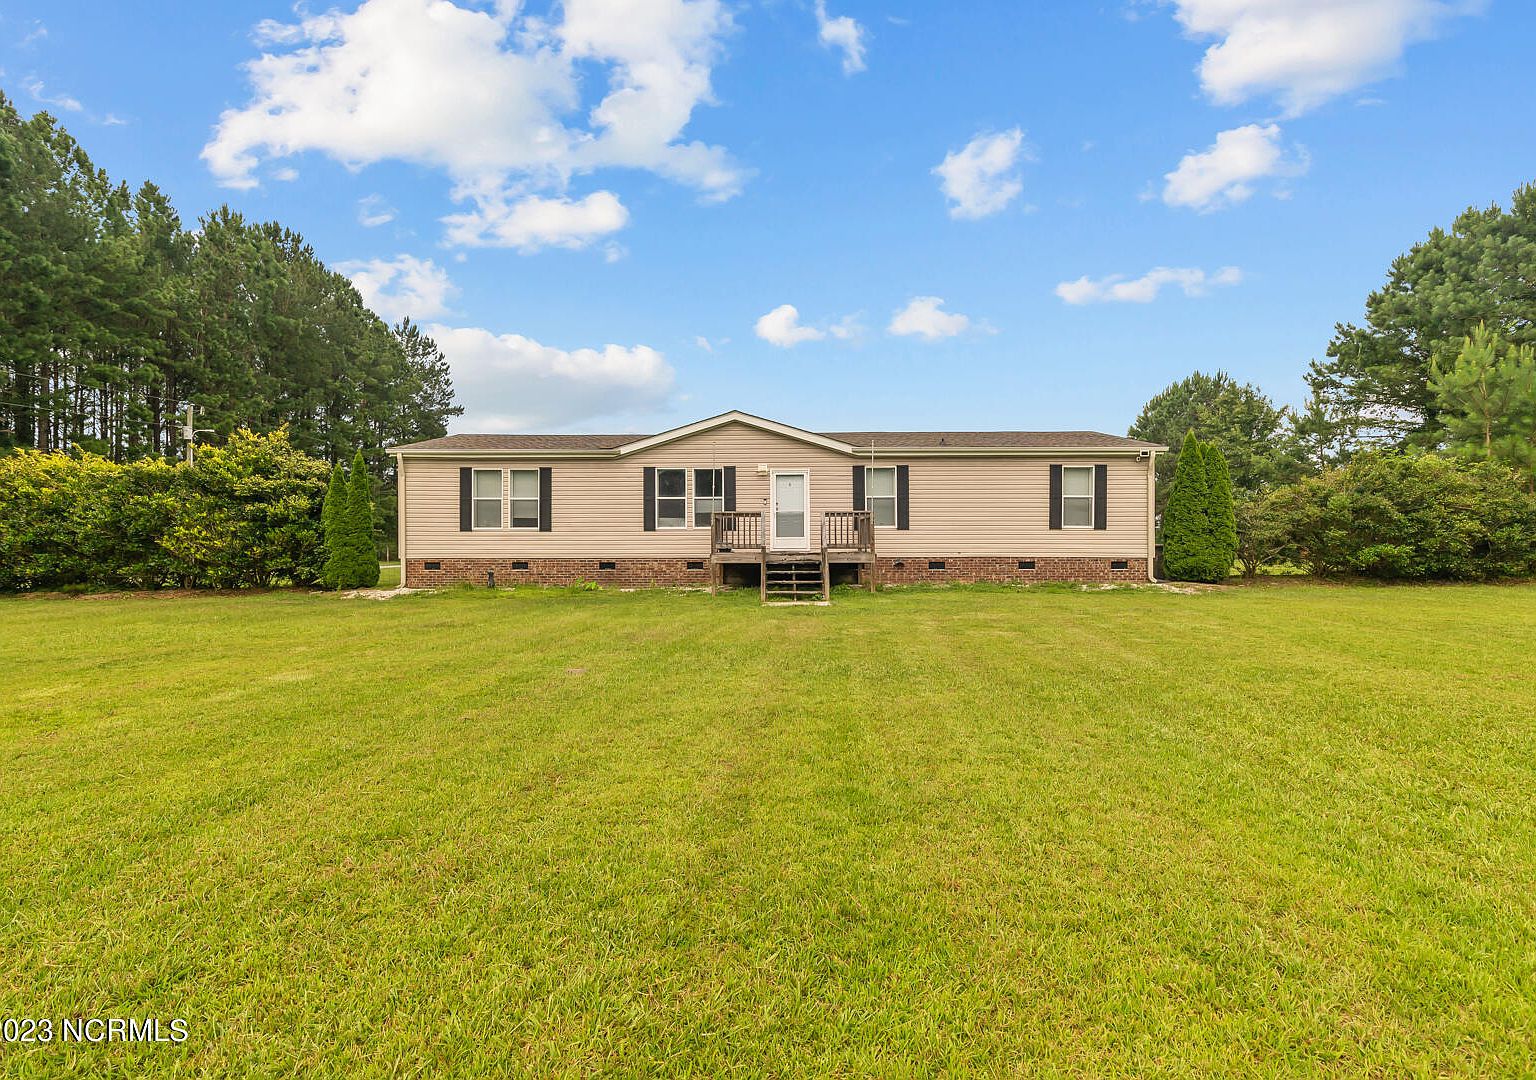 1730 White Oak River Road Maysville NC 28555 Zillow